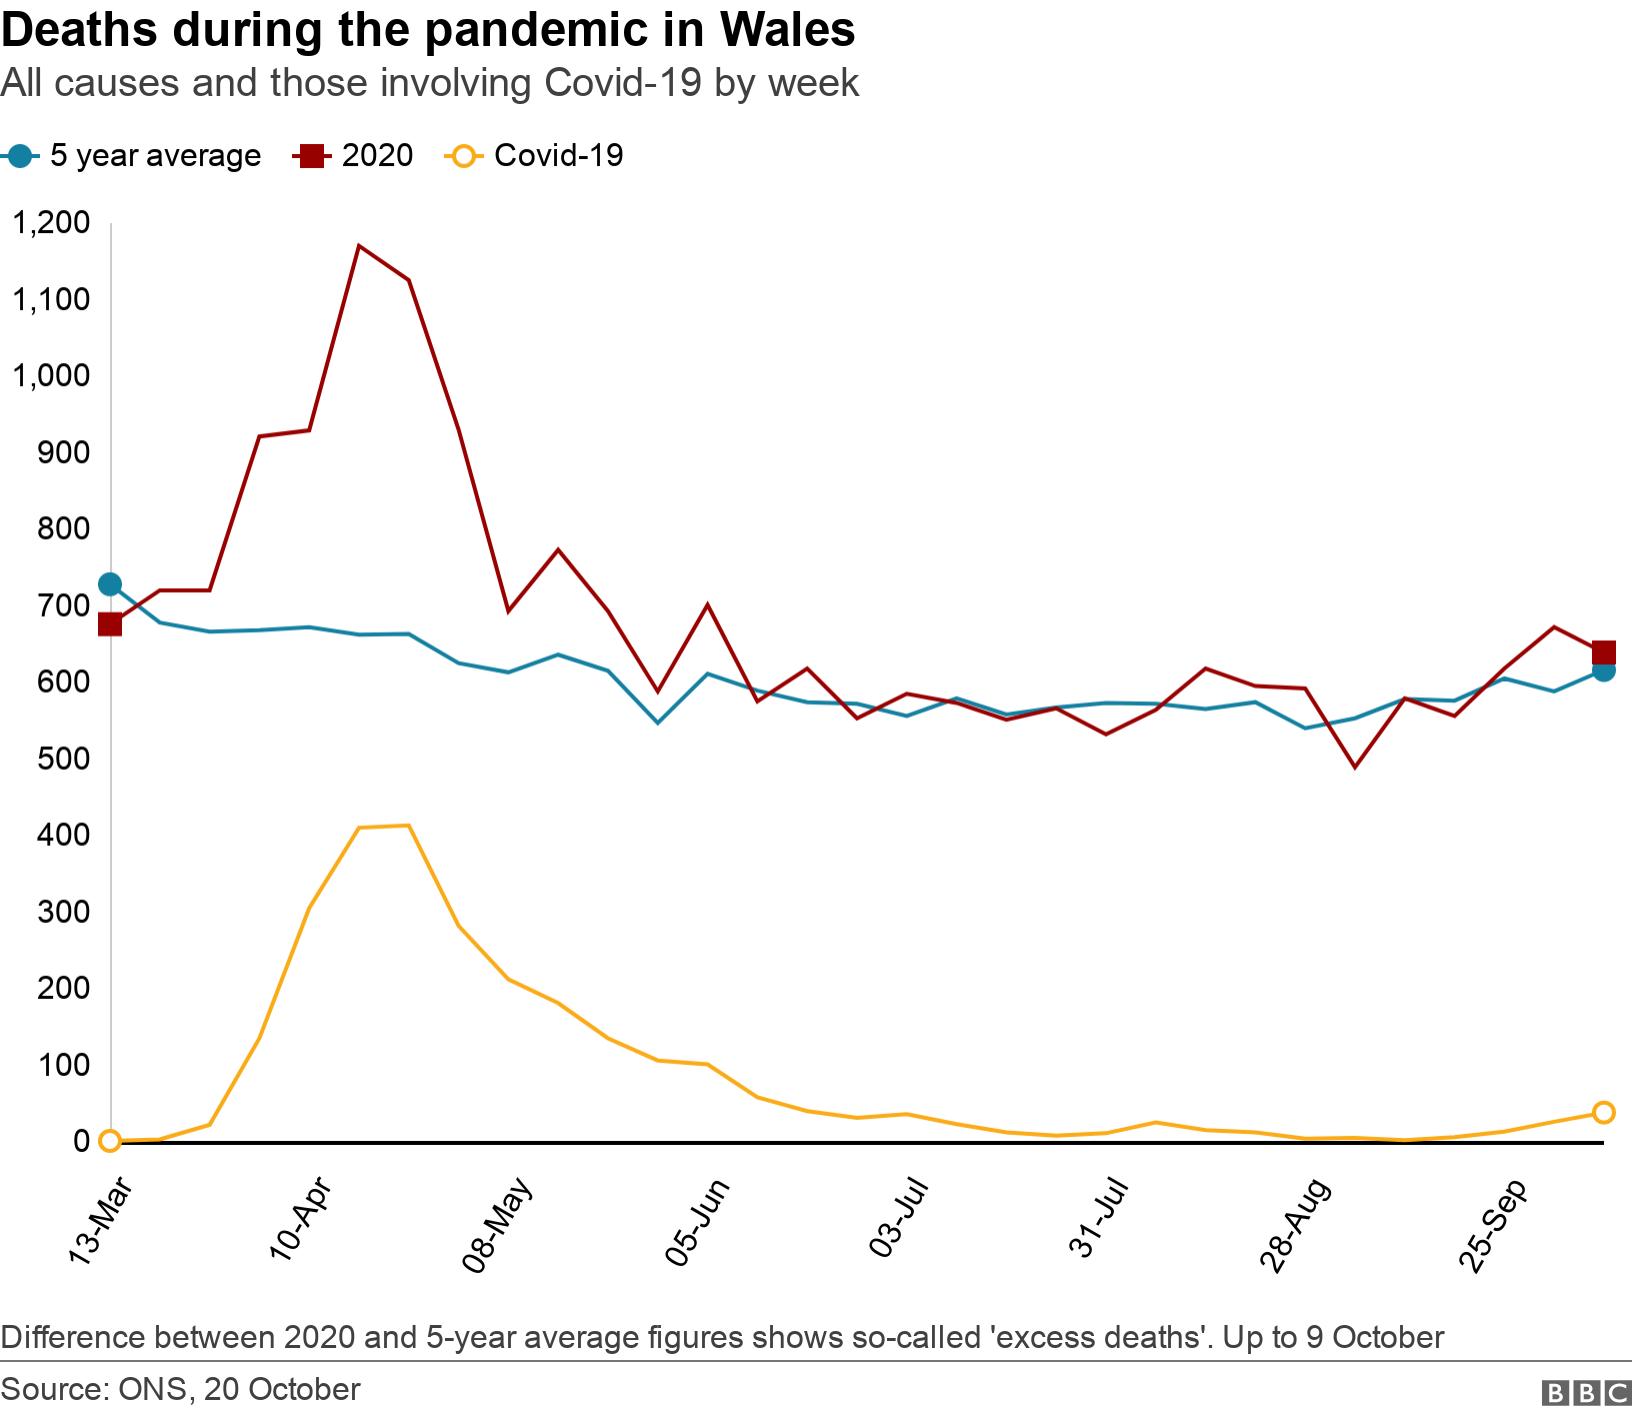 Deaths during the pandemic in Wales. All causes and those involving Covid-19 by week. Difference between 2020 and 5-year average figures shows so-called &#39;excess deaths&#39;. Up to 9 October.